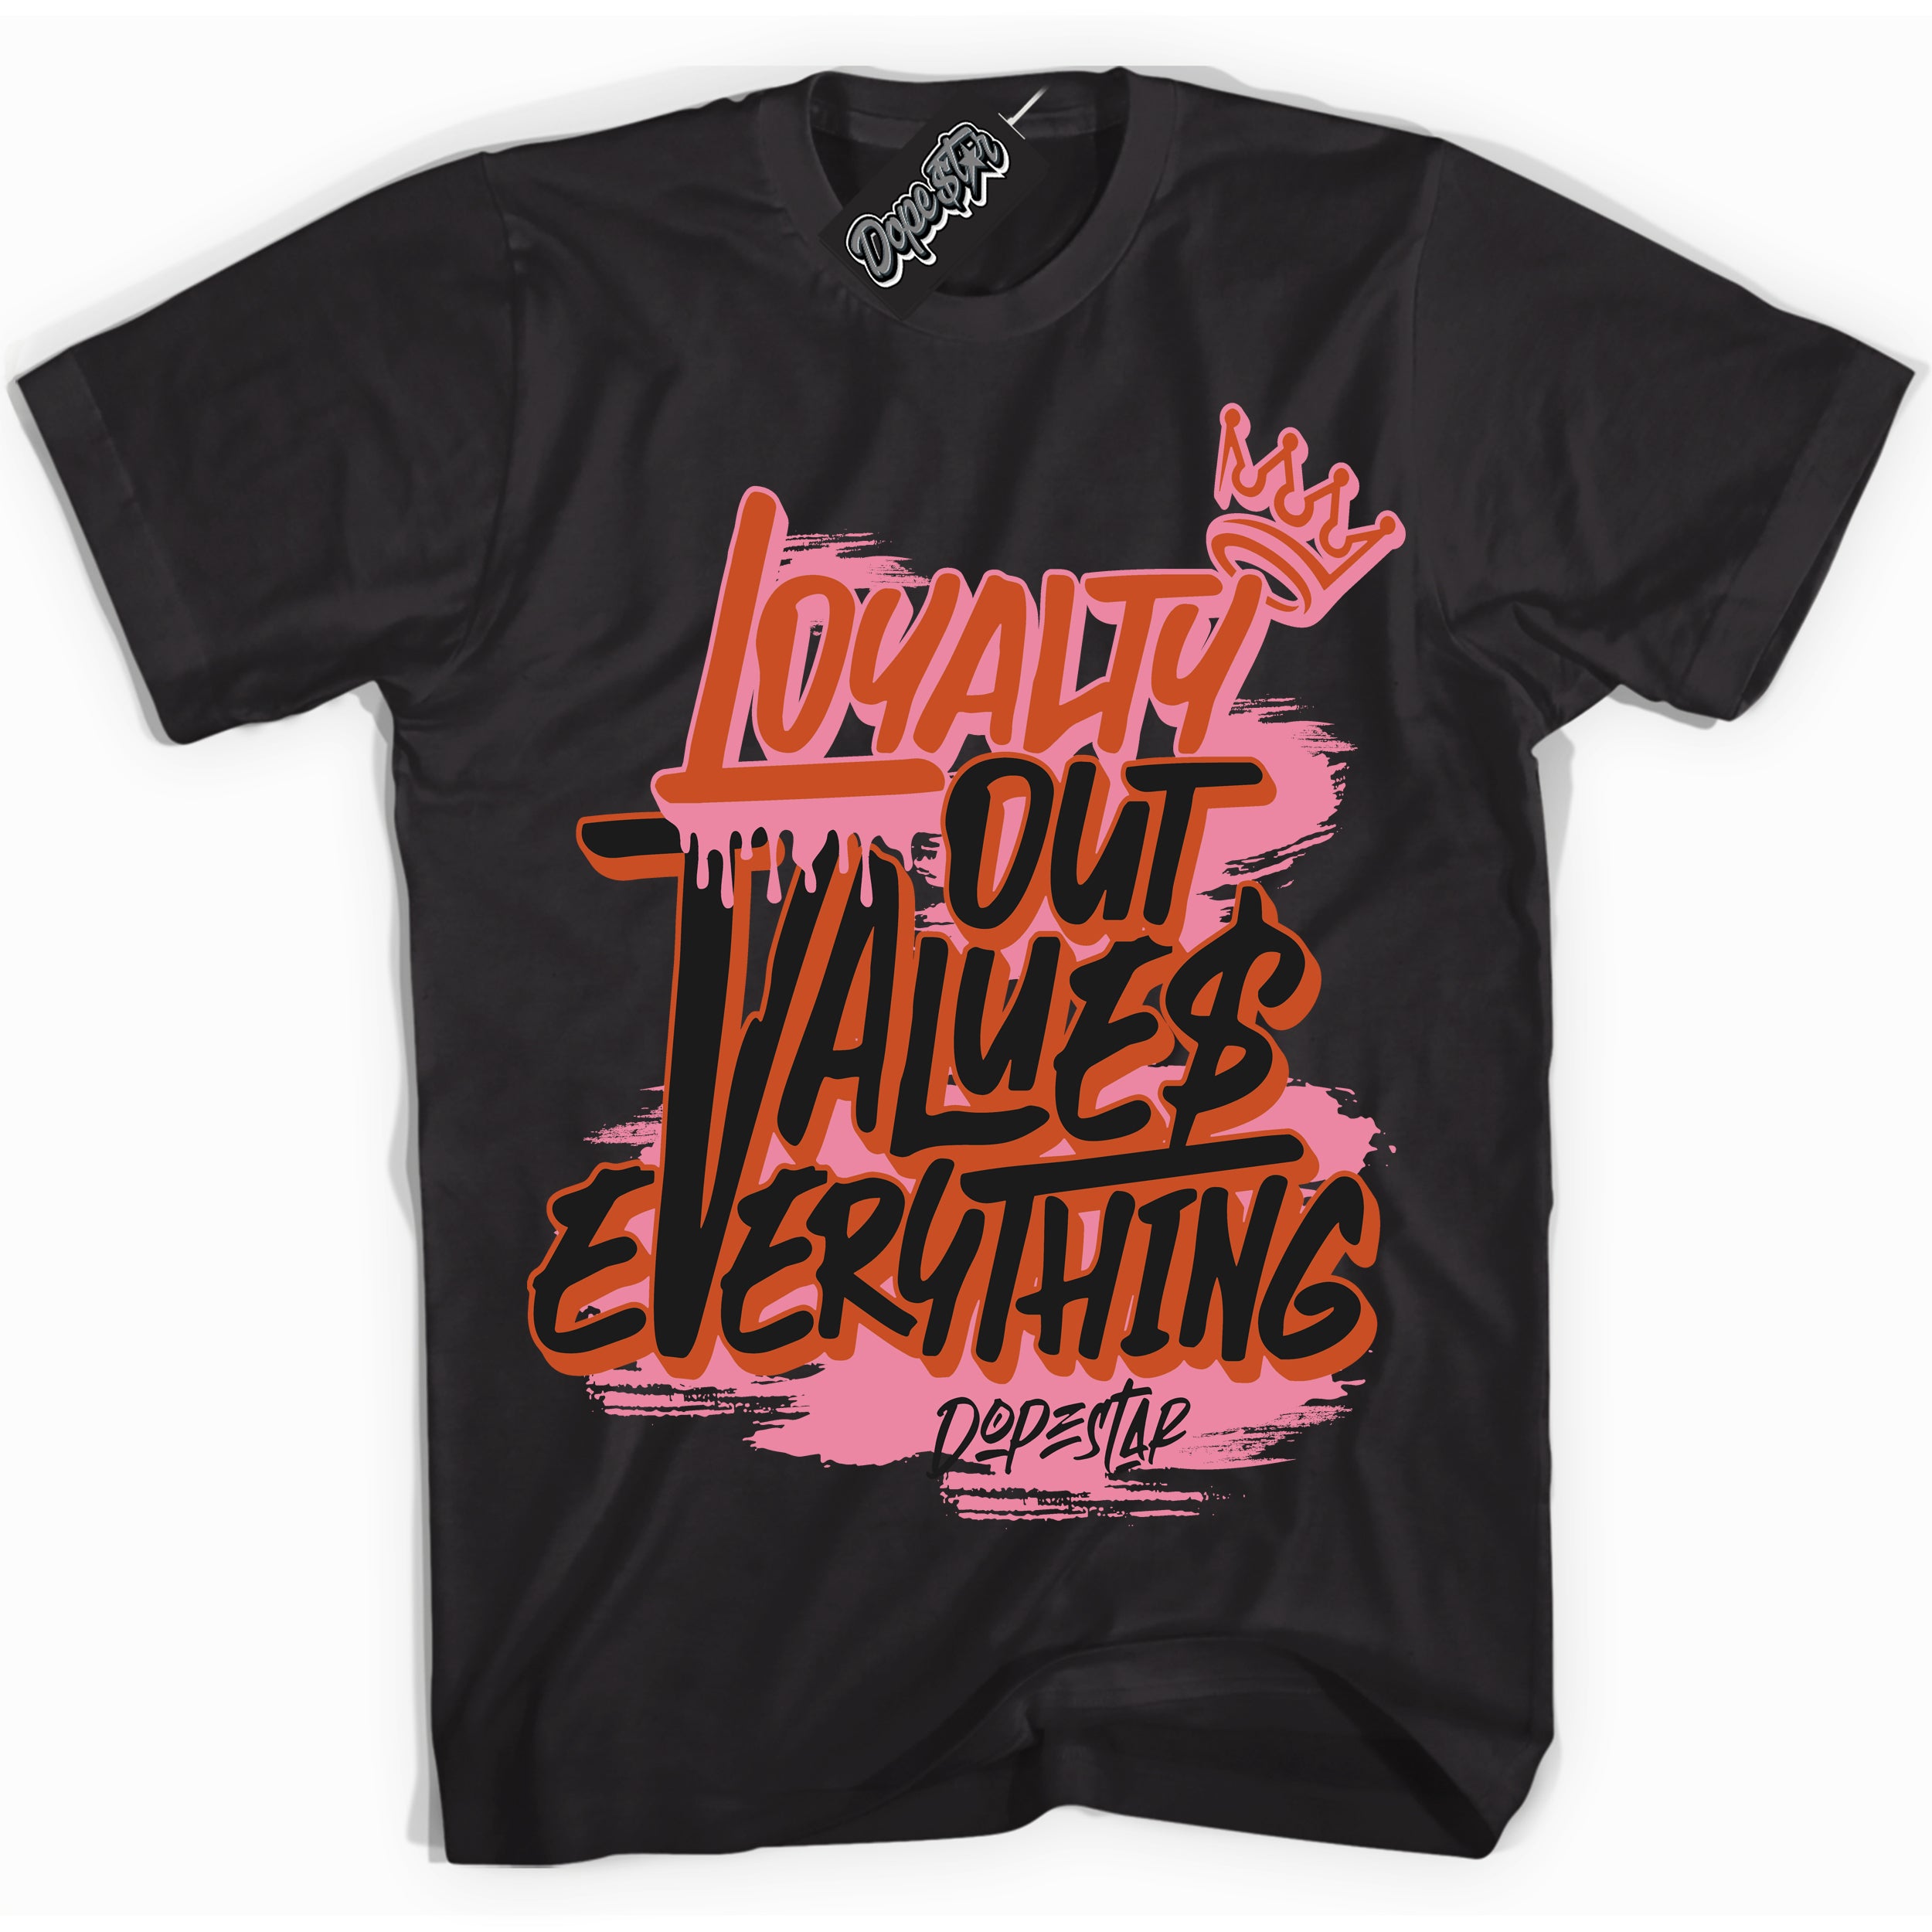 Cool Black Shirt with “ Loyalty Out Values Everything” design that perfectly matches Pro x Powerpuff Girls Blossom Sneakers.